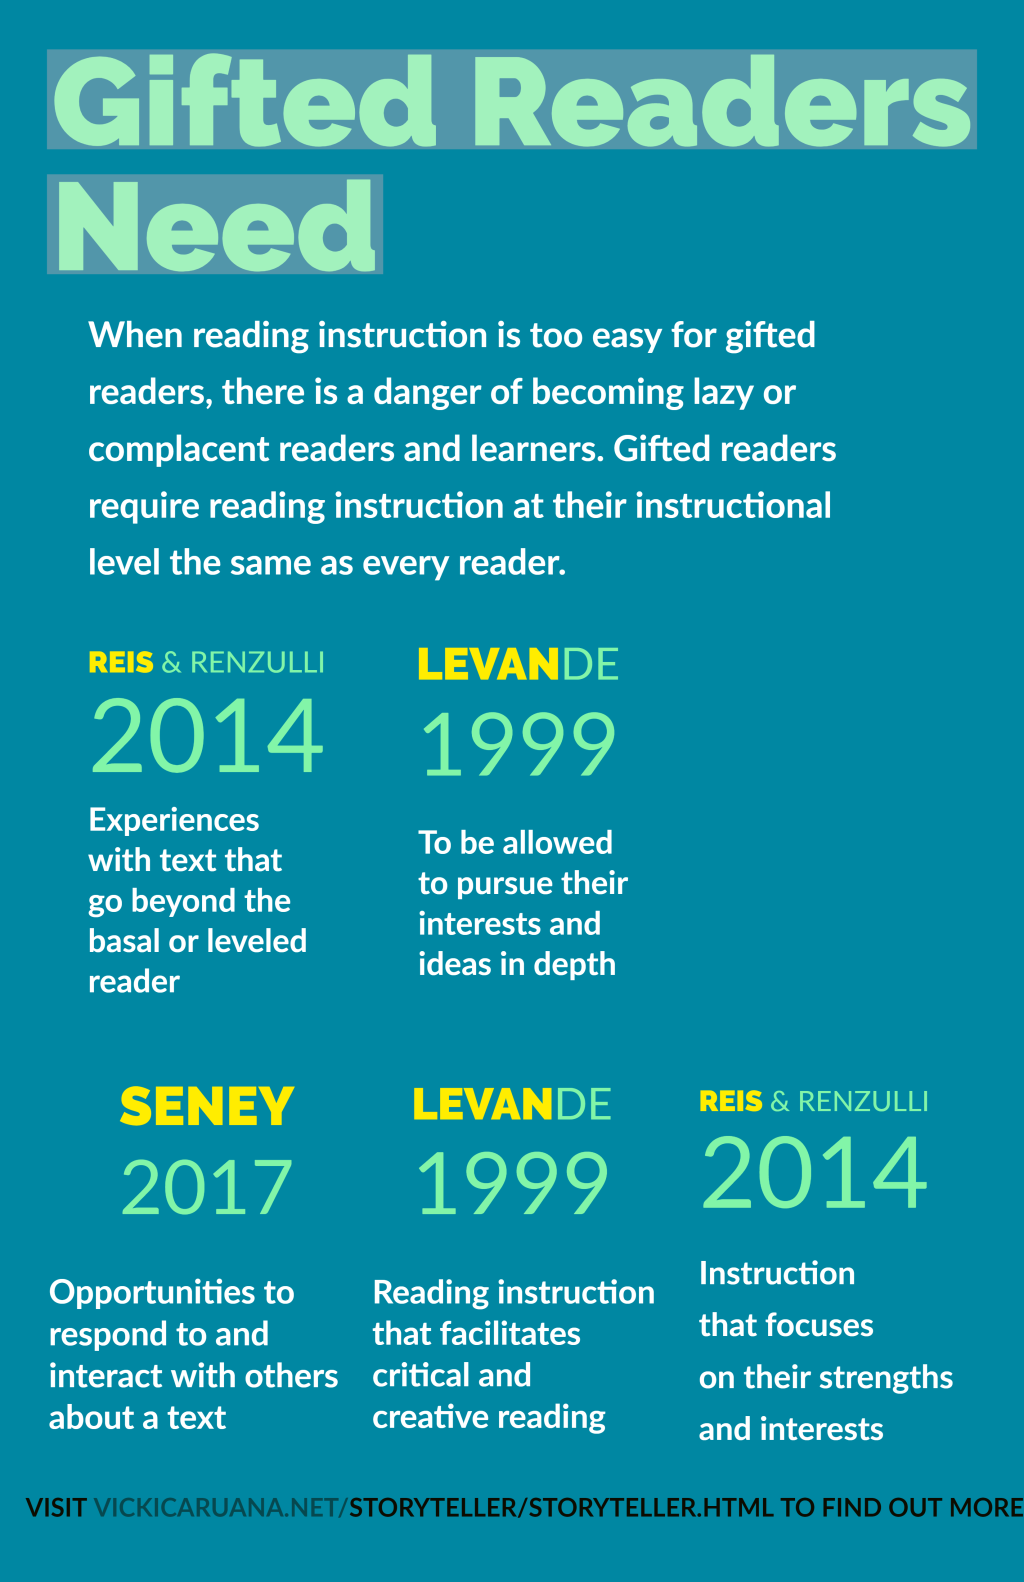 Day 5 Literacy Strategies for Gifted Readers: